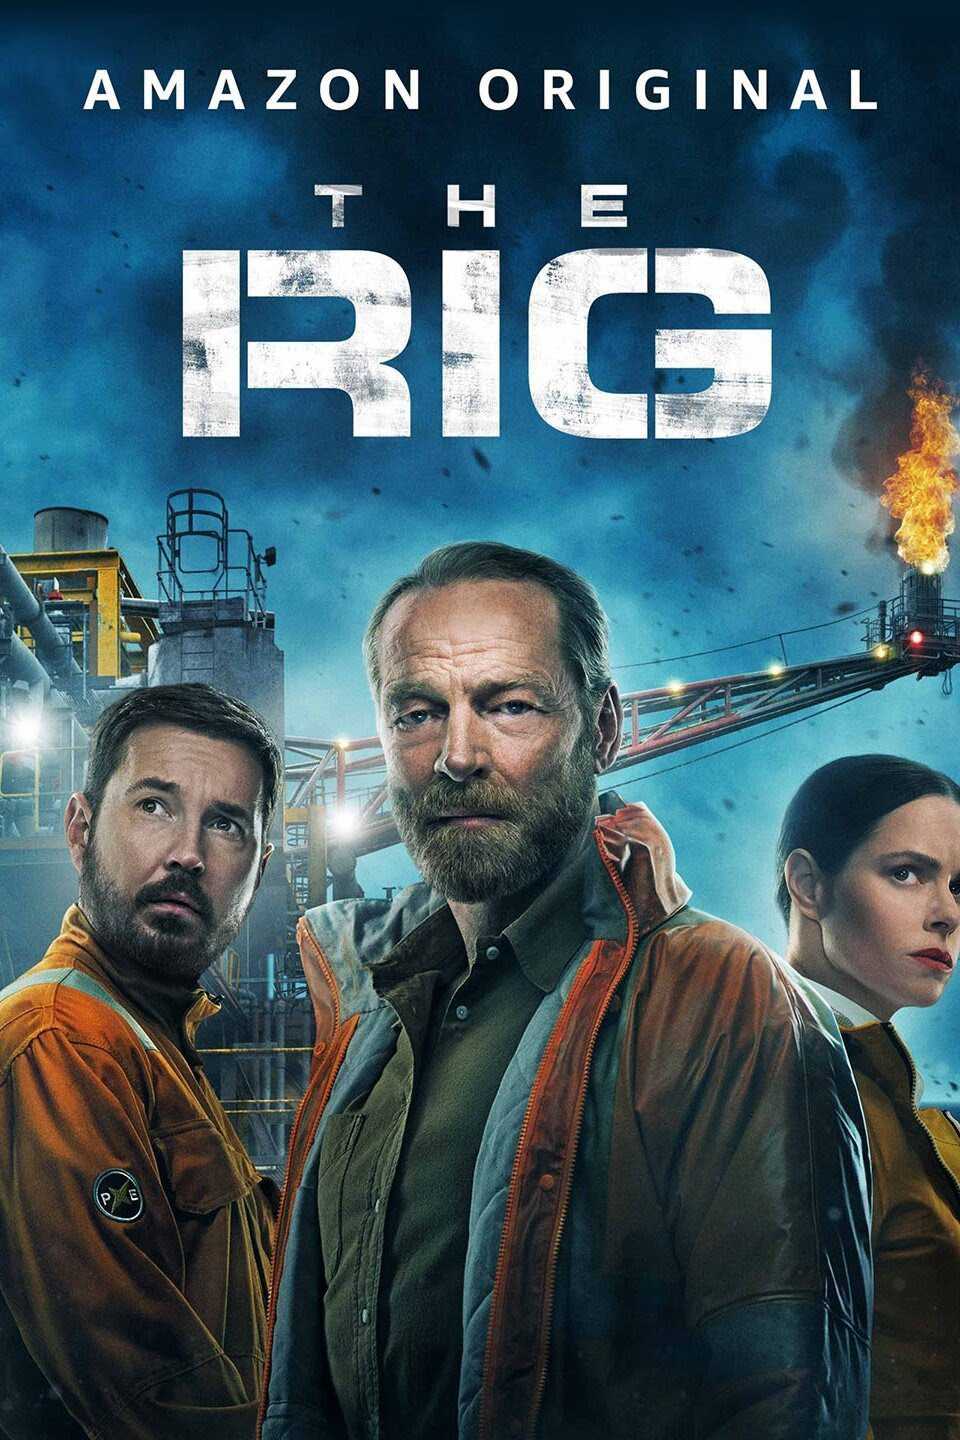 The rig - The rig